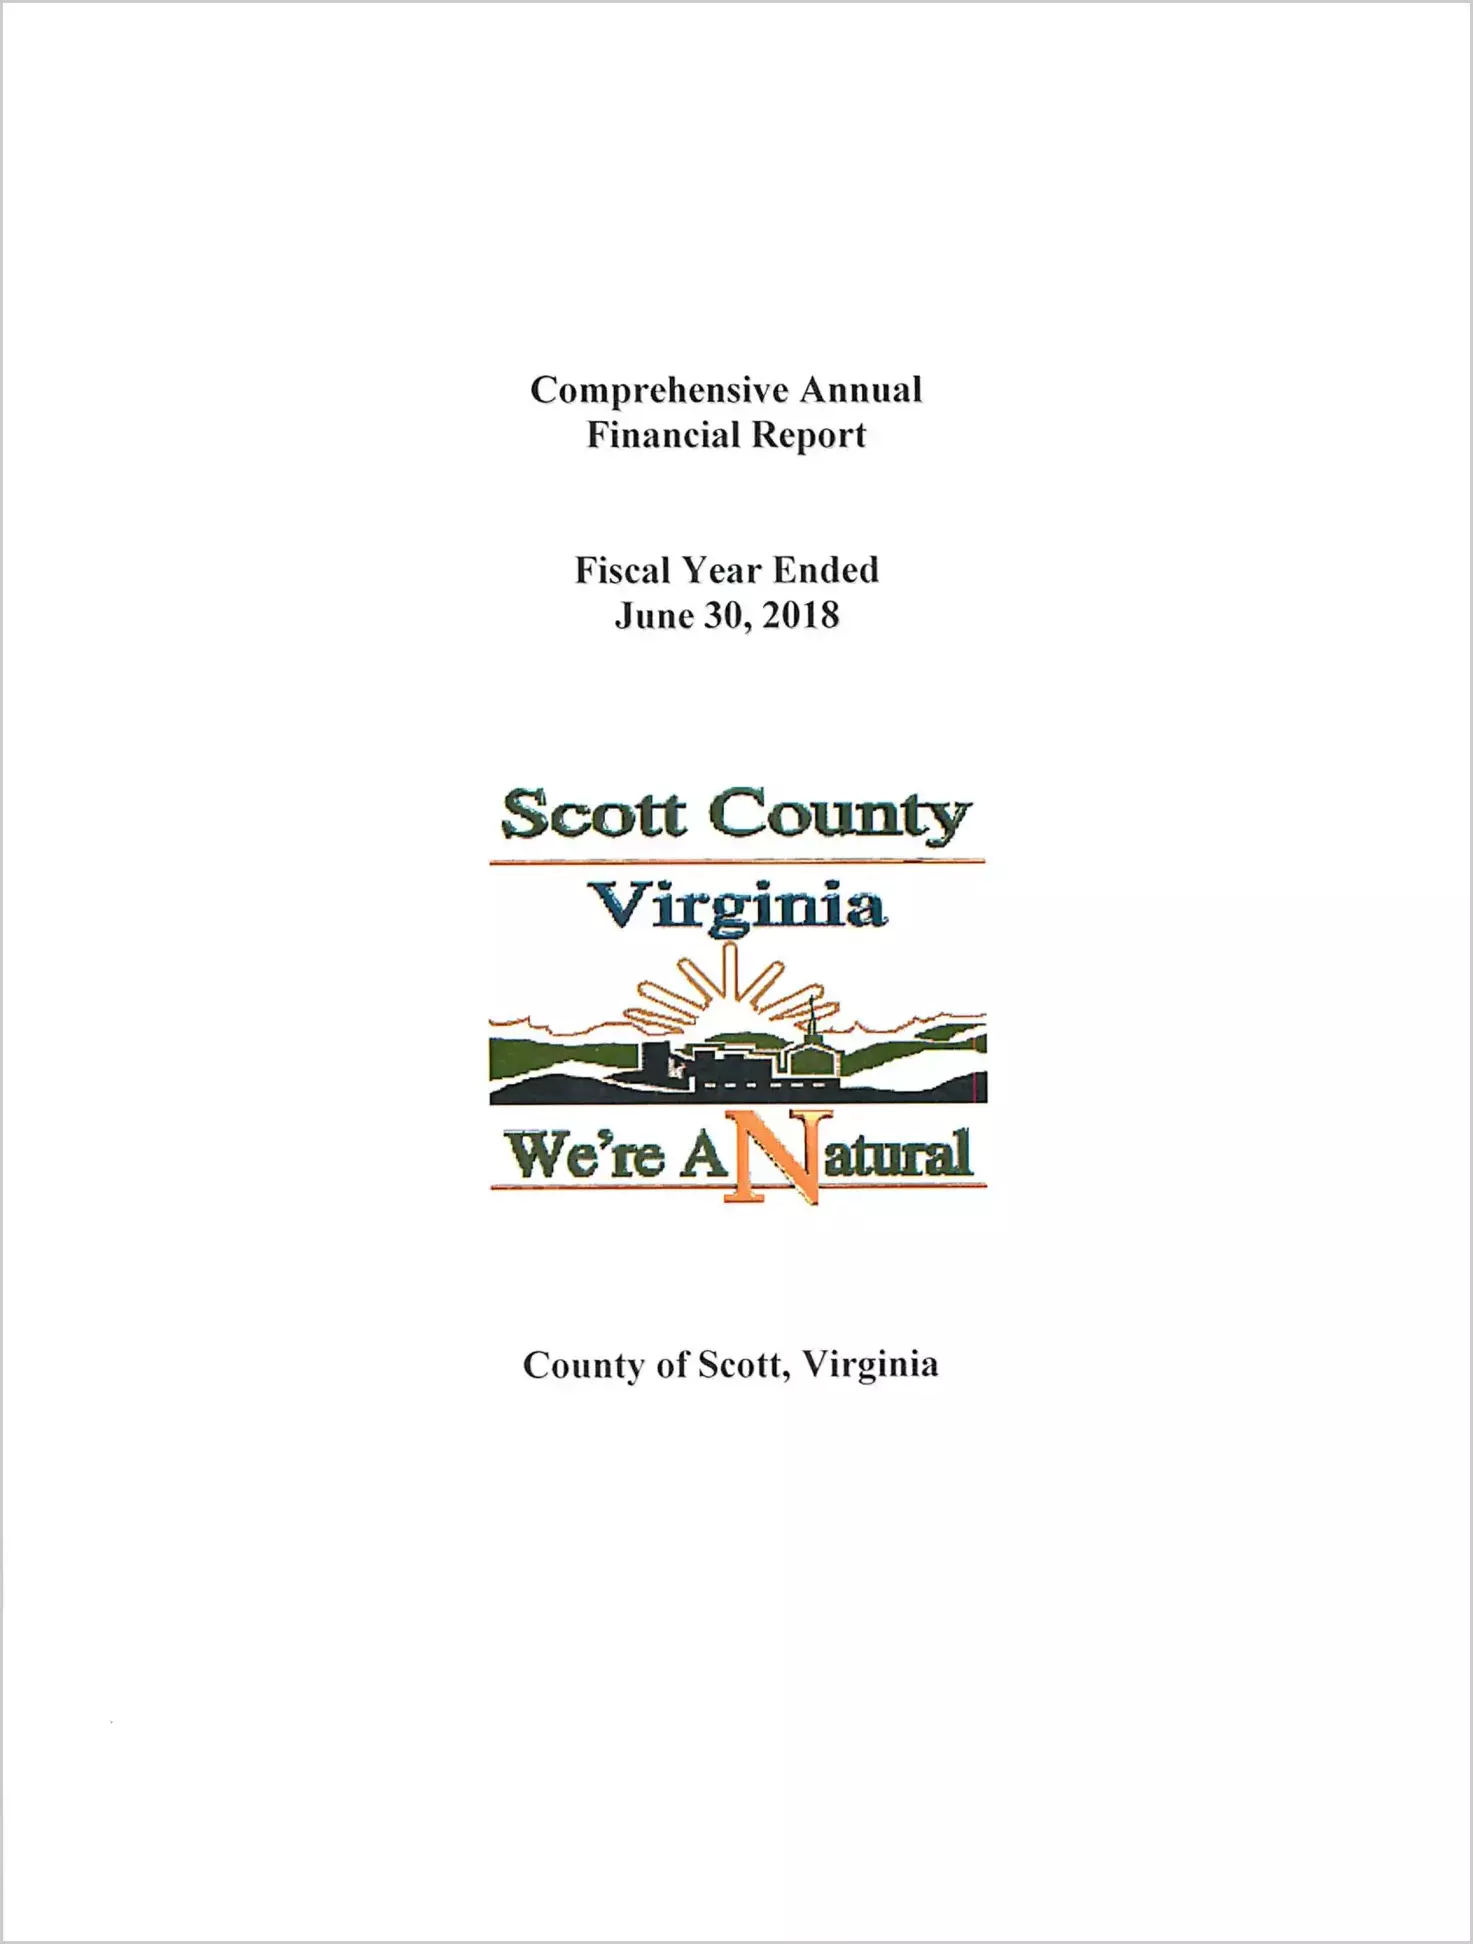 2018 Annual Financial Report for County of Scott